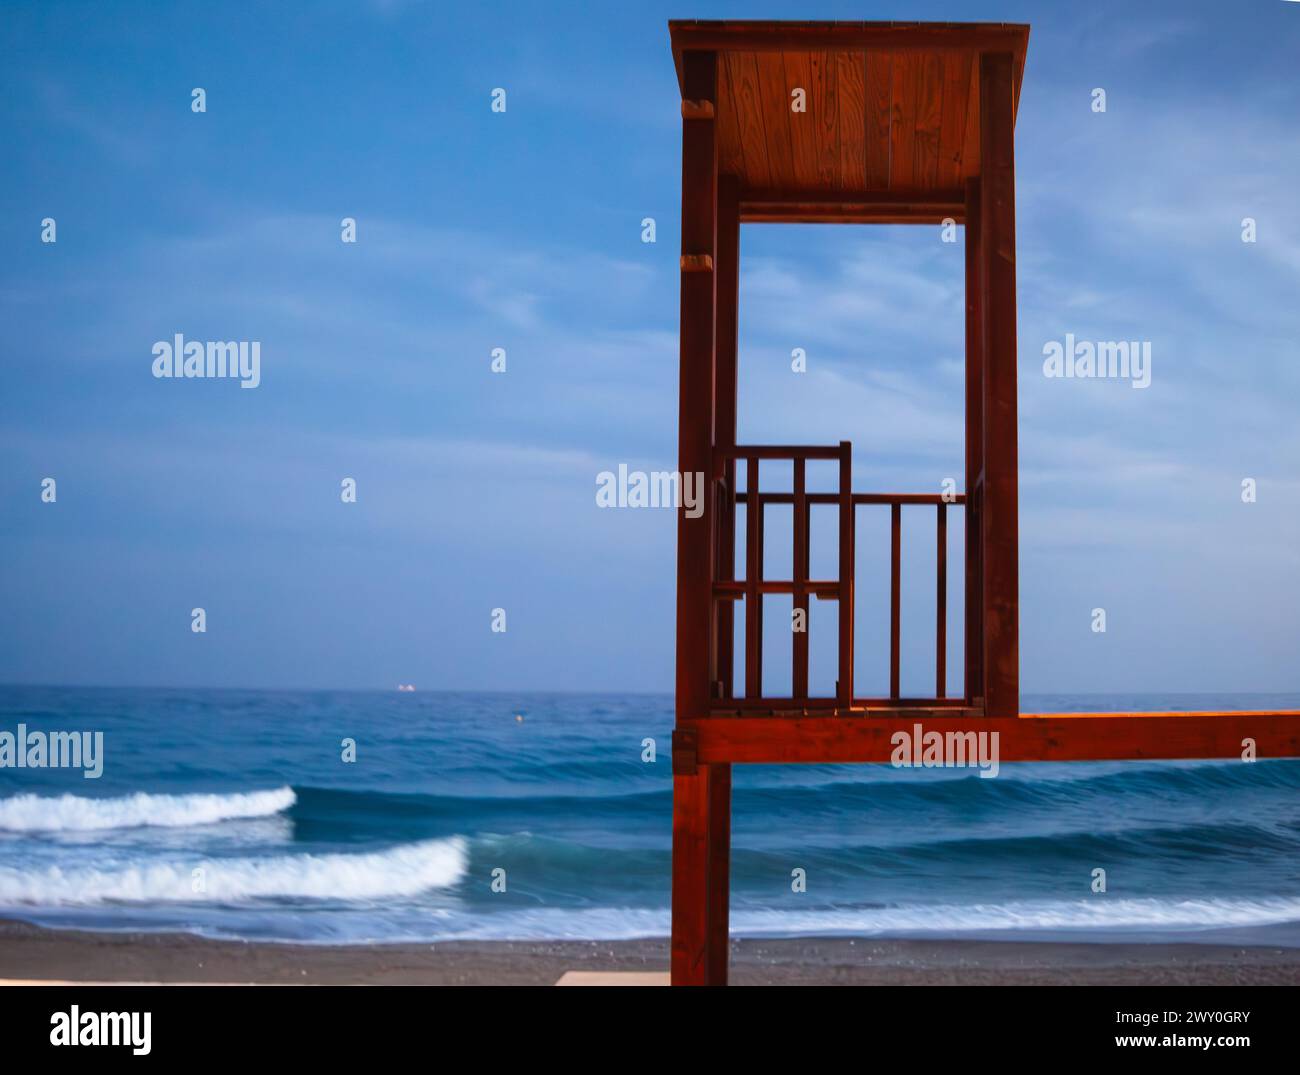 Wooden Lifeguard tower on beach in Spain Stock Photo